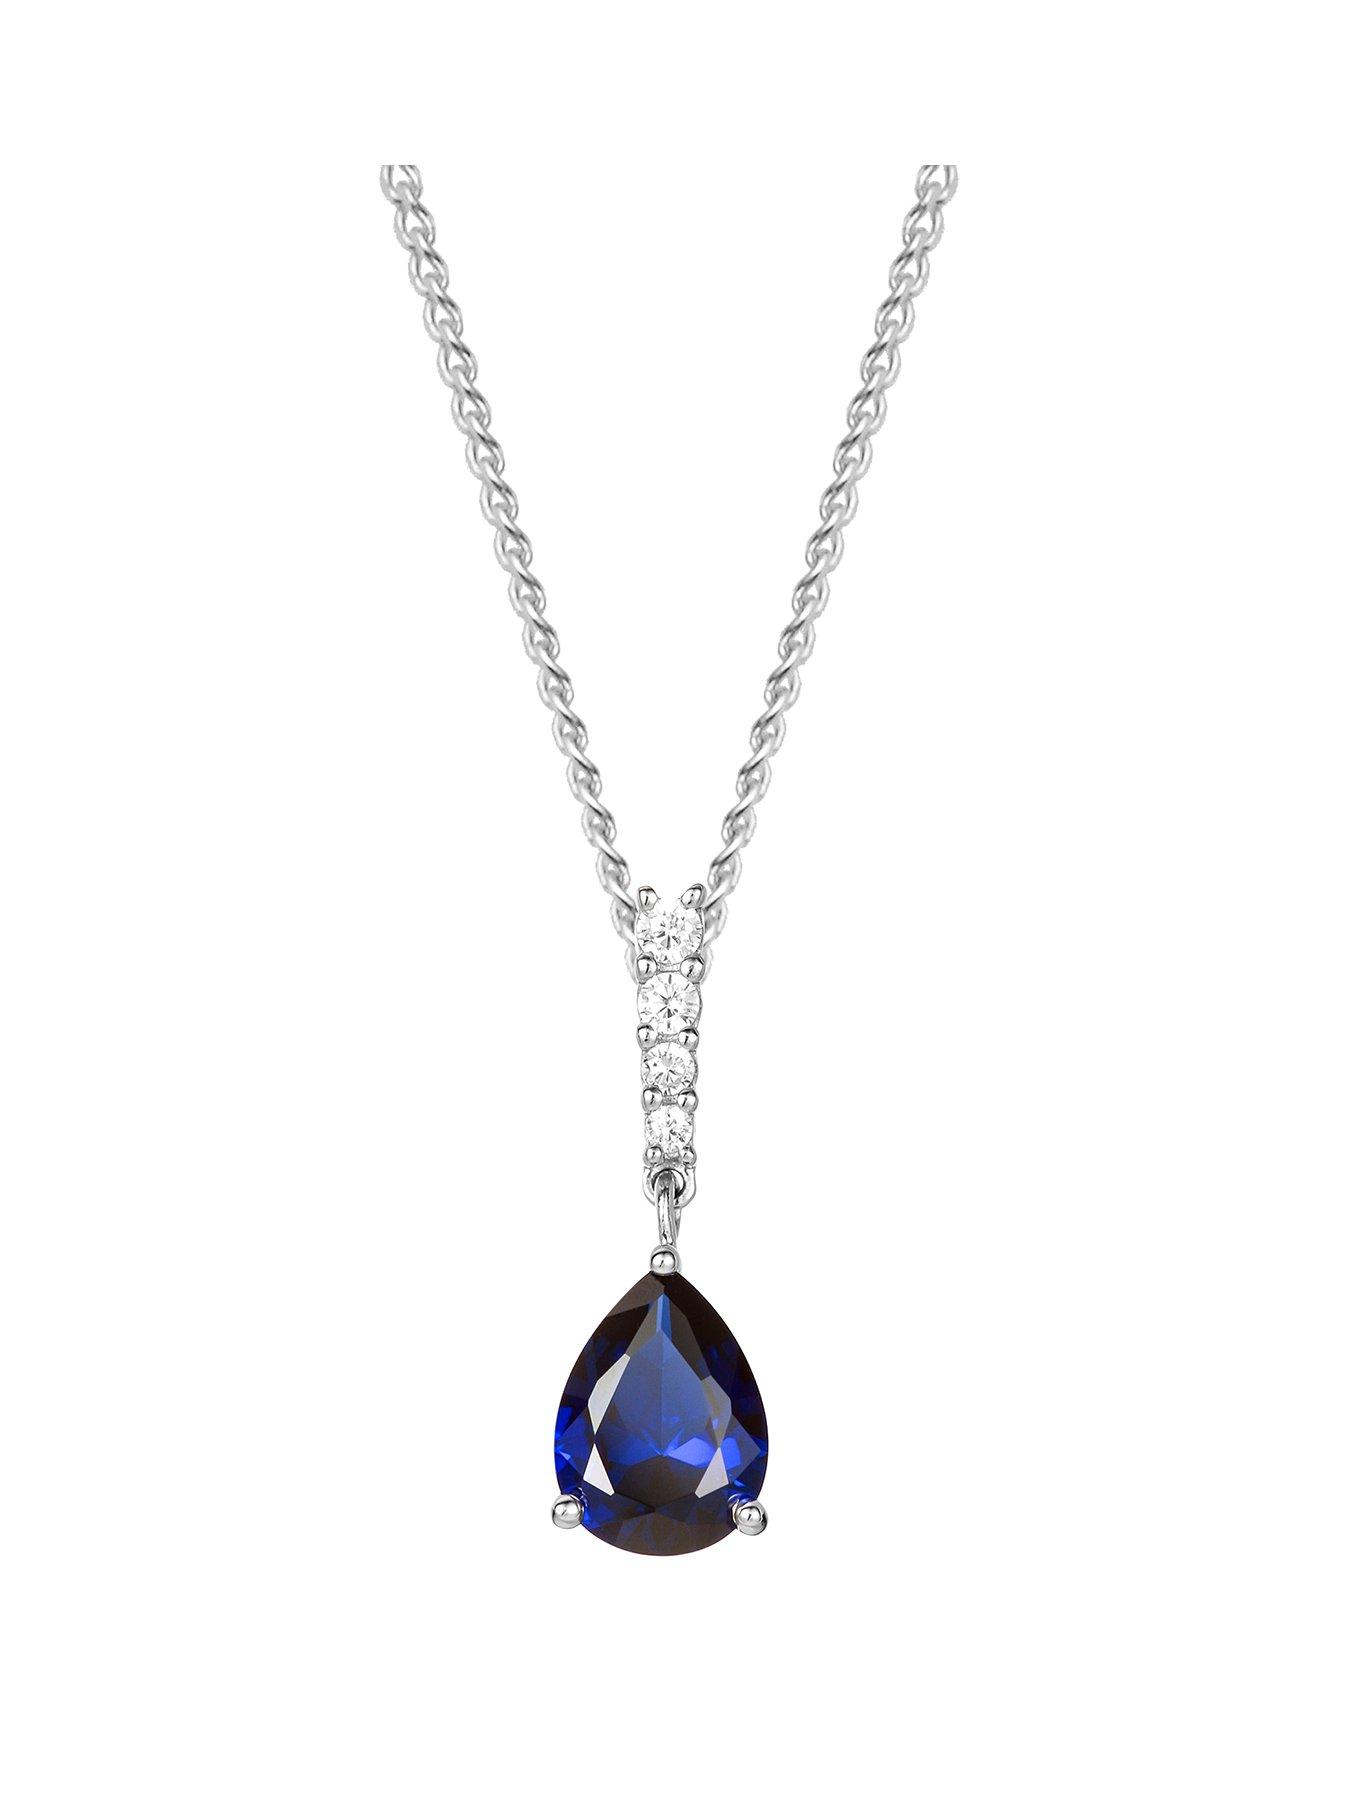  9ct White Gold Created Sapphire and Diamond Necklace 18 Inches